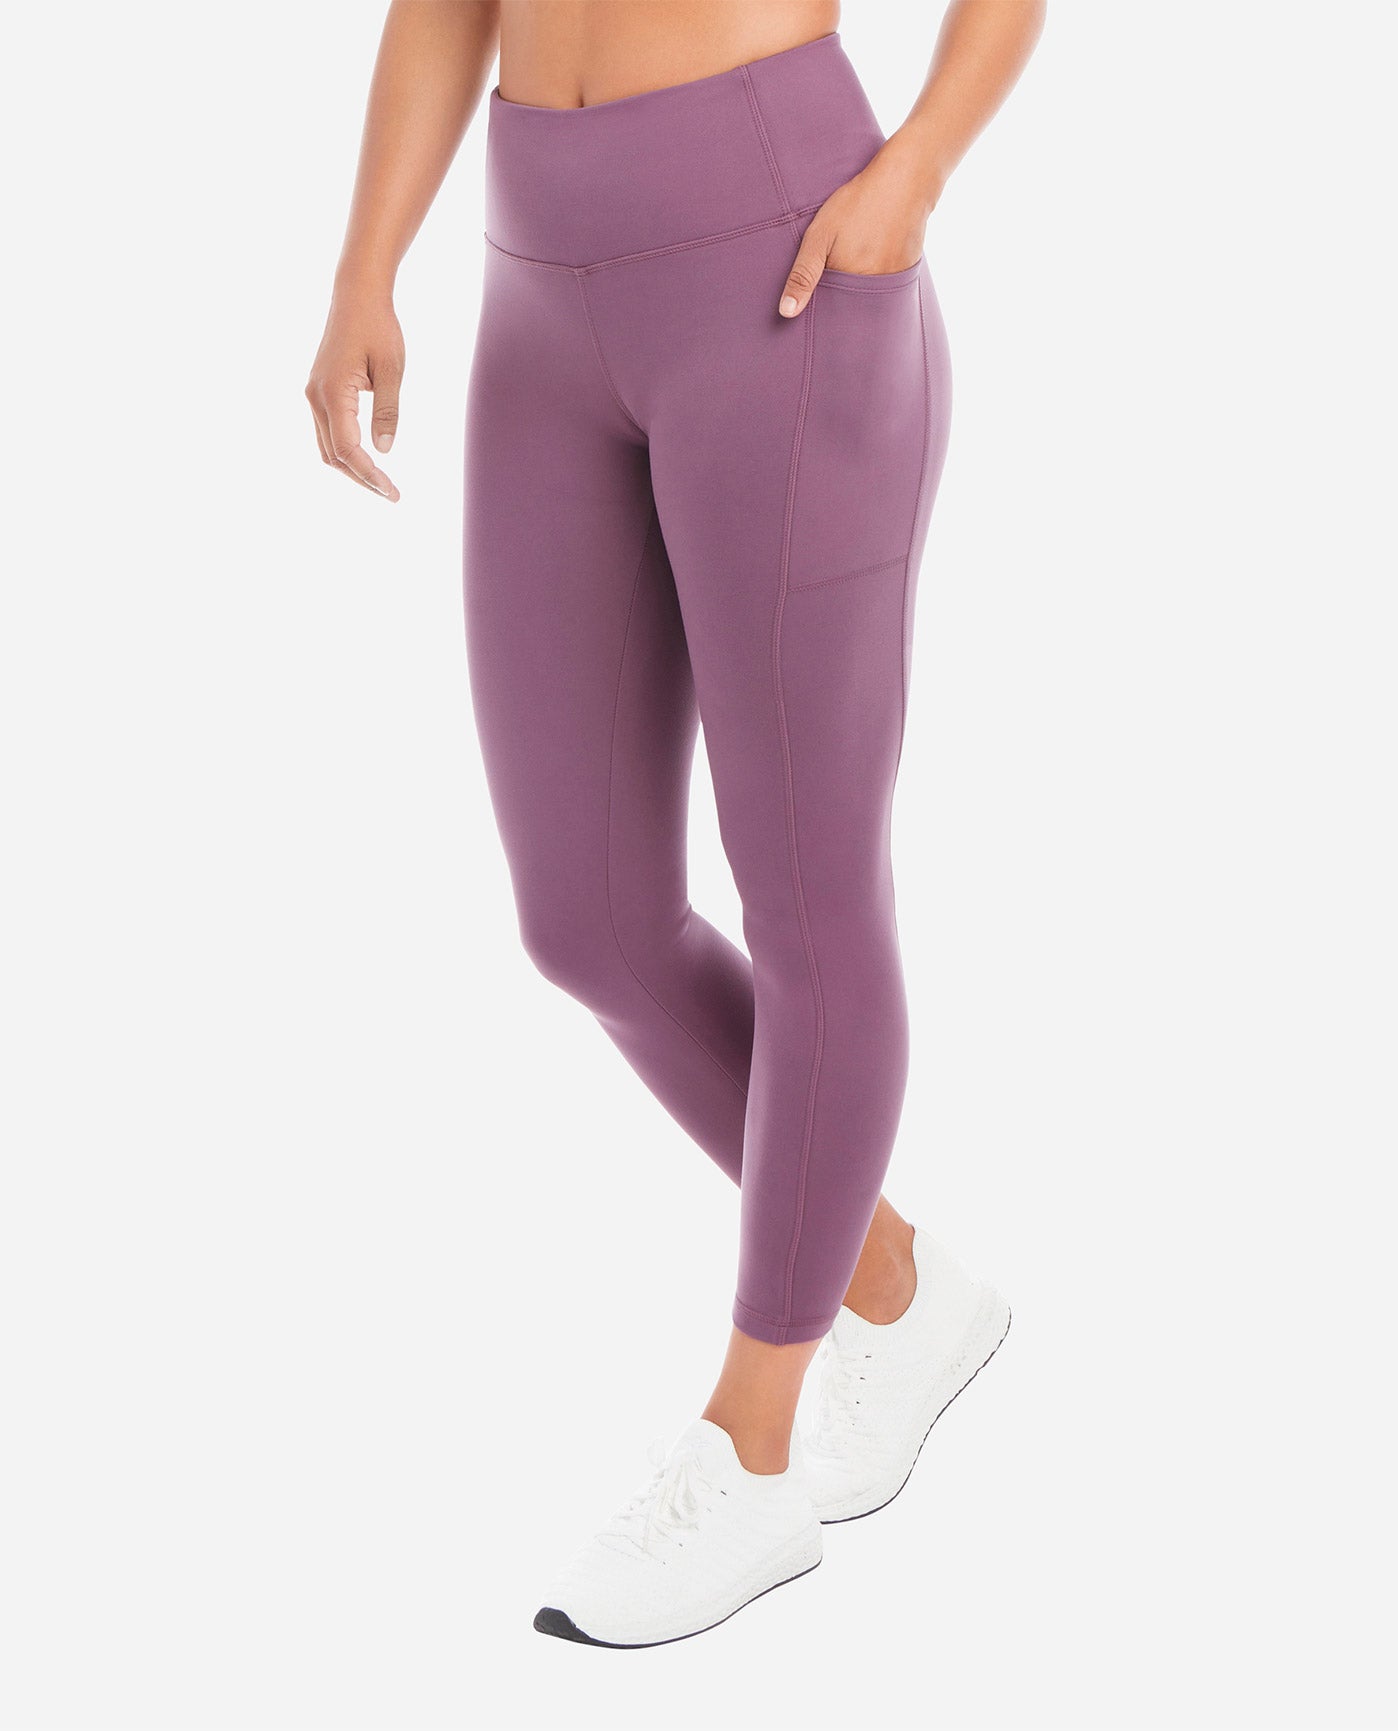 Danskin Women's Performance Leggings with Side Pockets Select Size and  Color NWT - Helia Beer Co